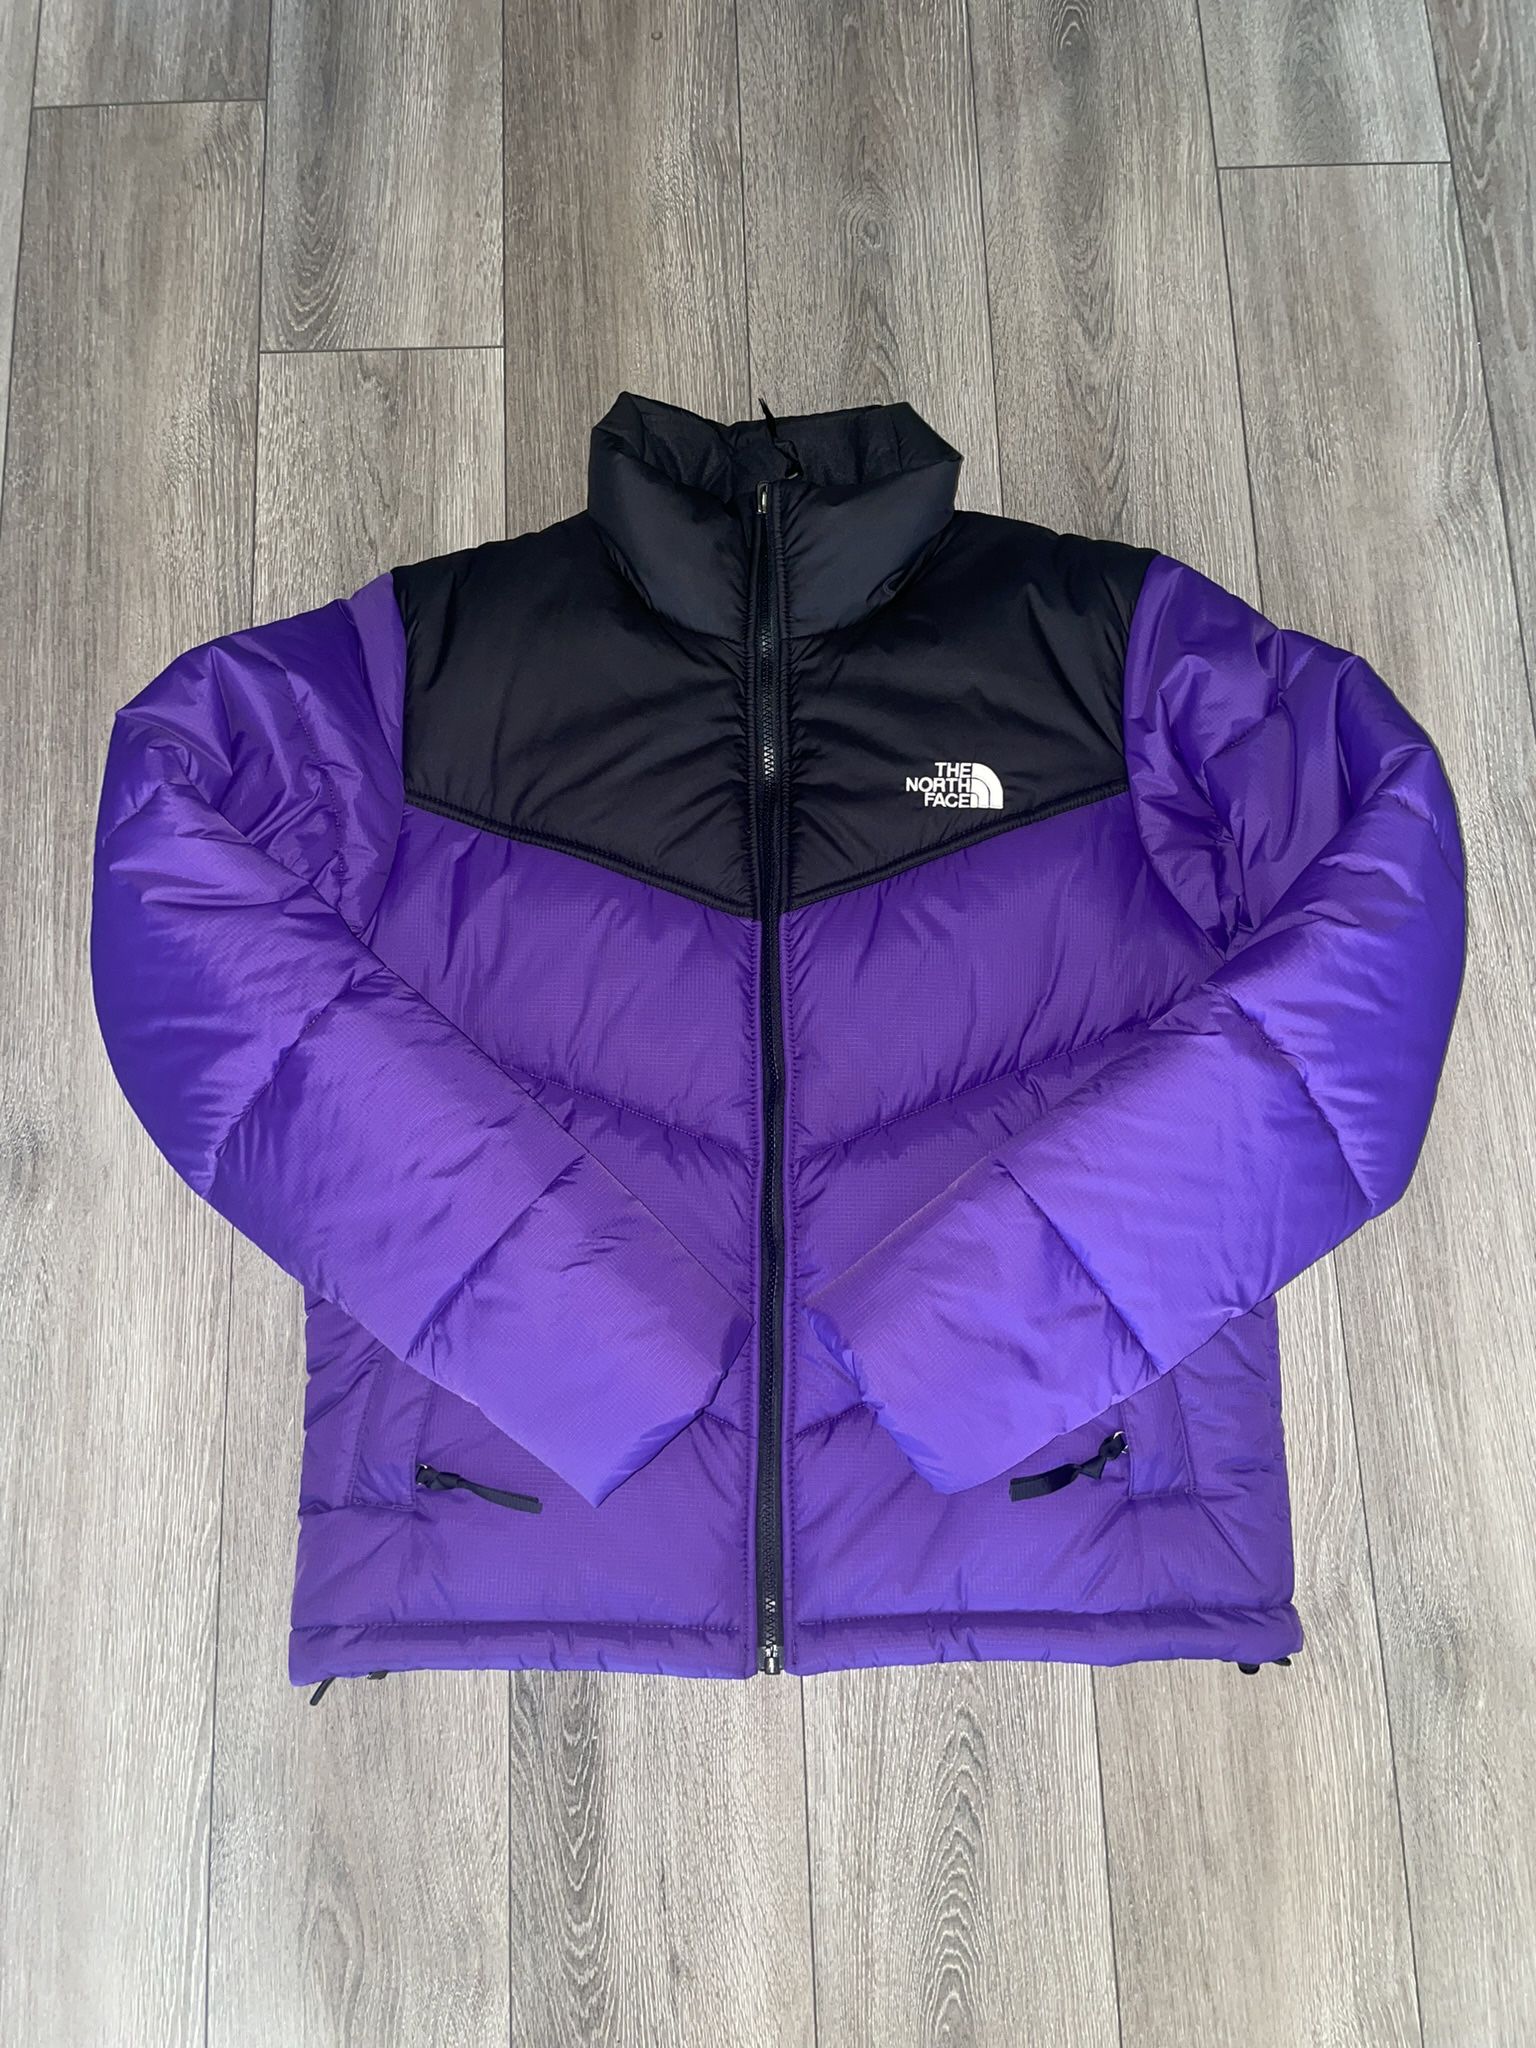 The North Face Puffer Jacket - Nuptse